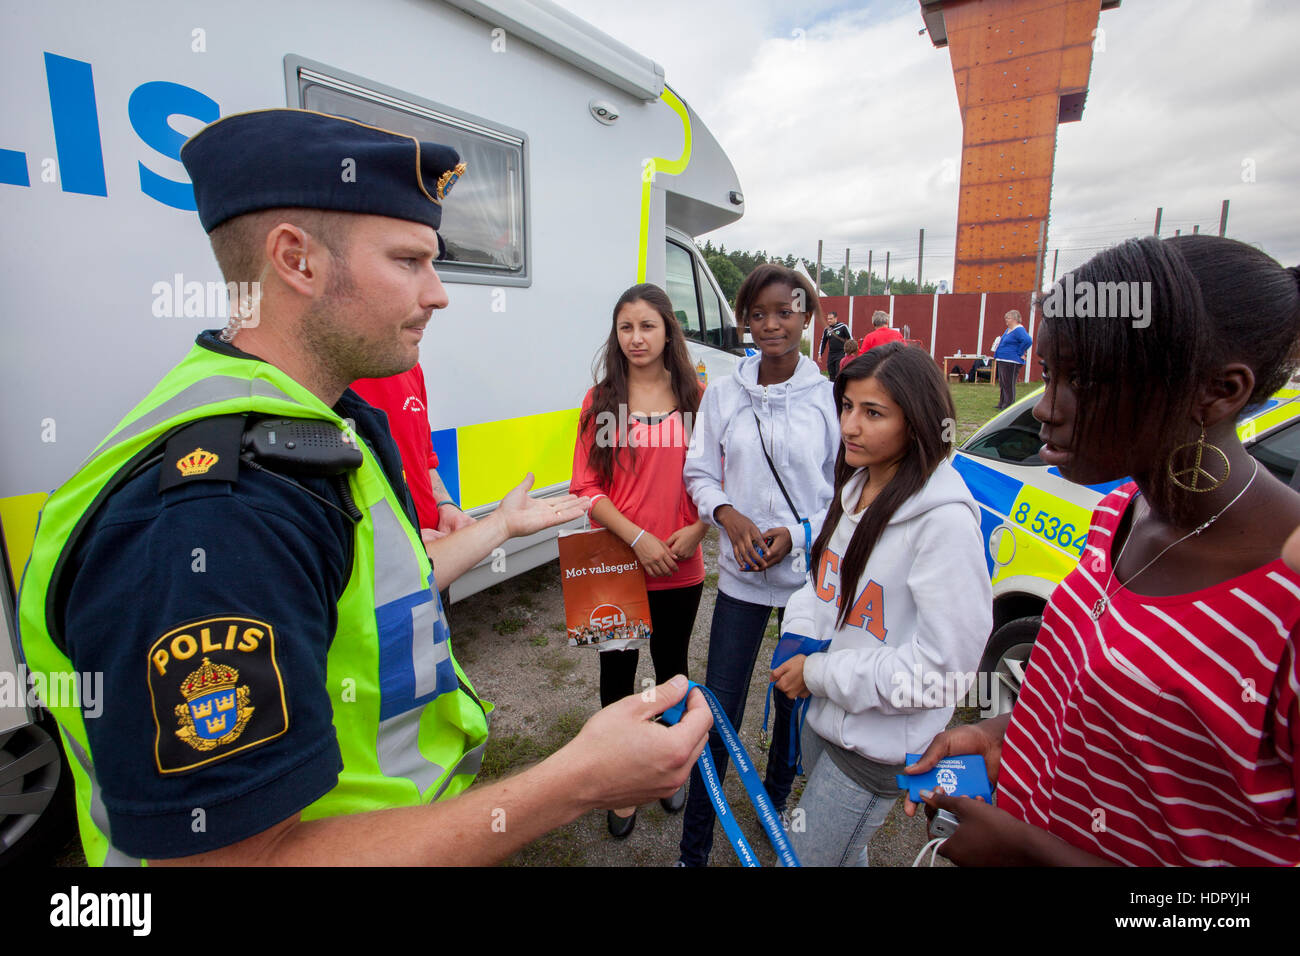 Police informs young people. Stock Photo